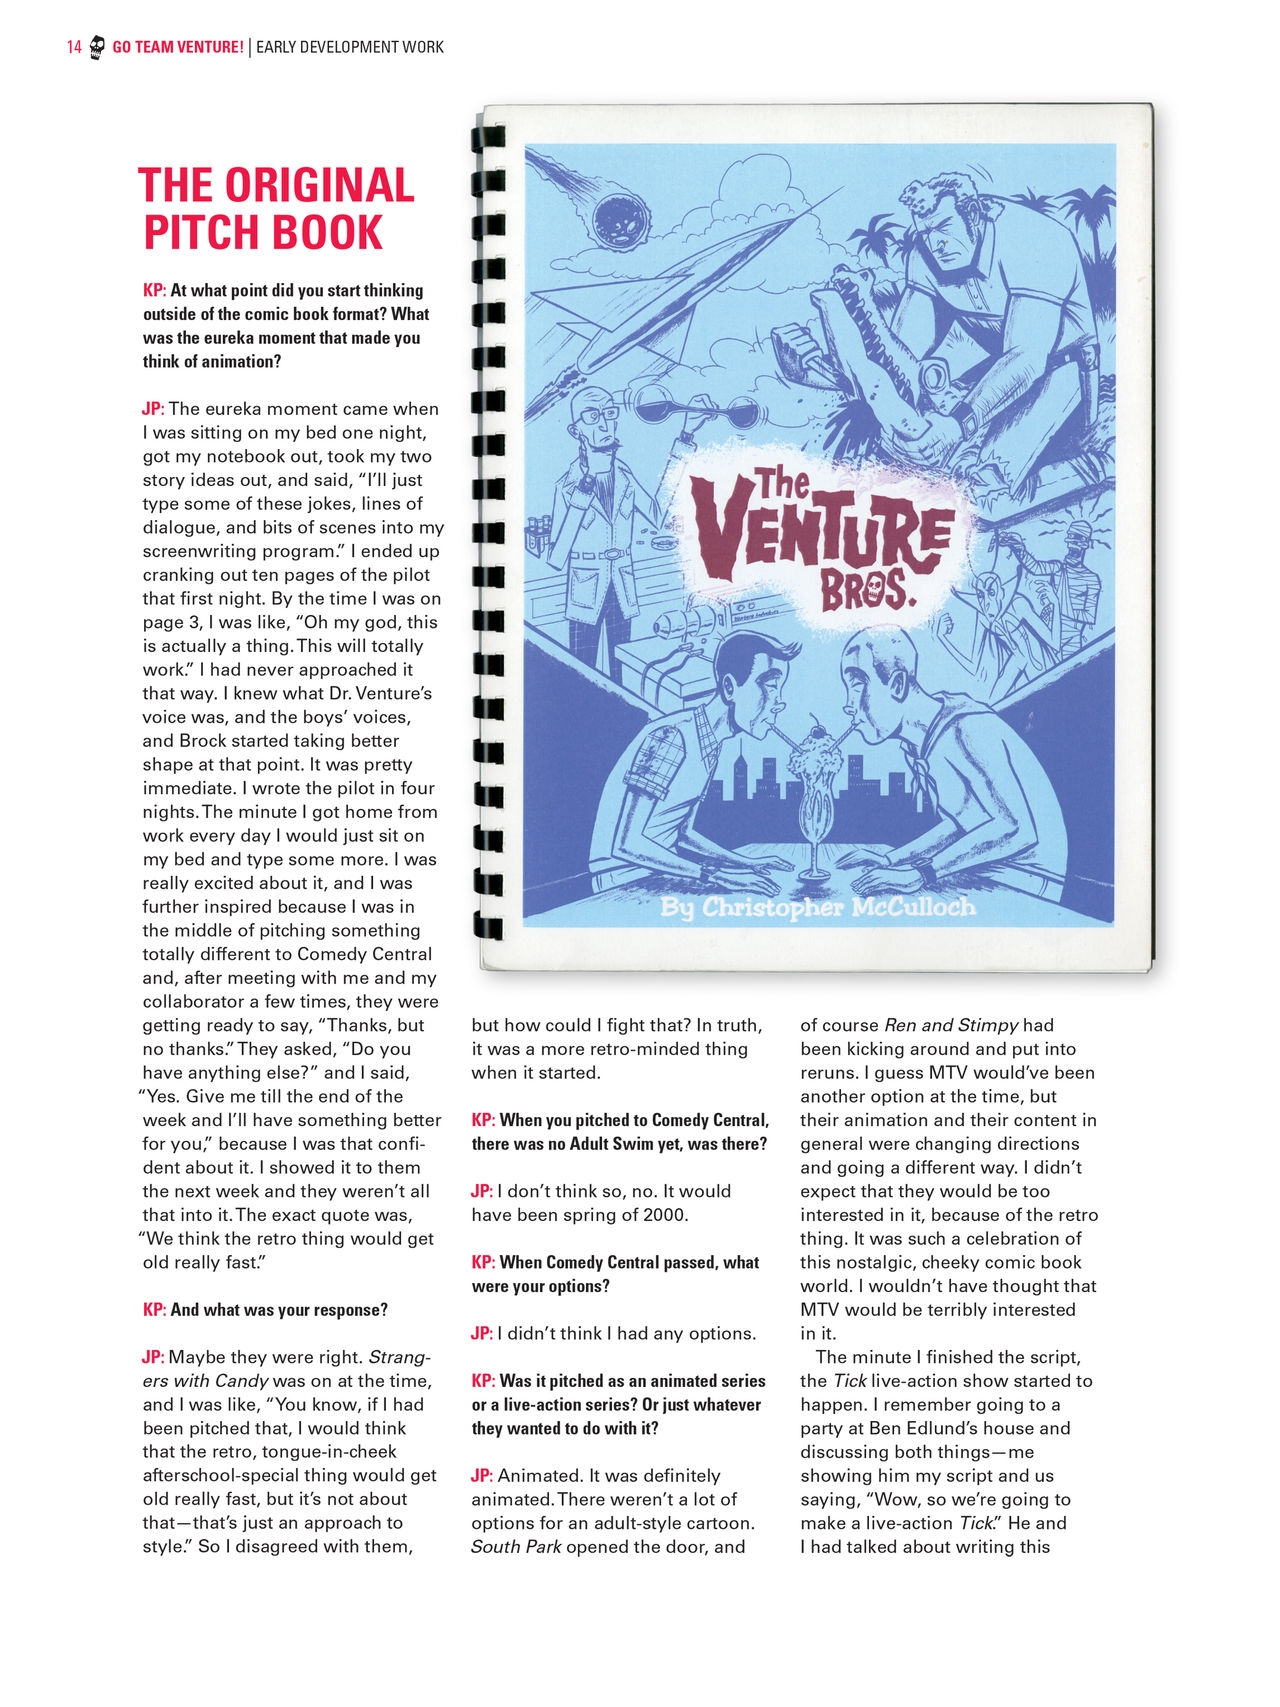 Go Team Venture! - The Art and Making of the Venture Bros 13